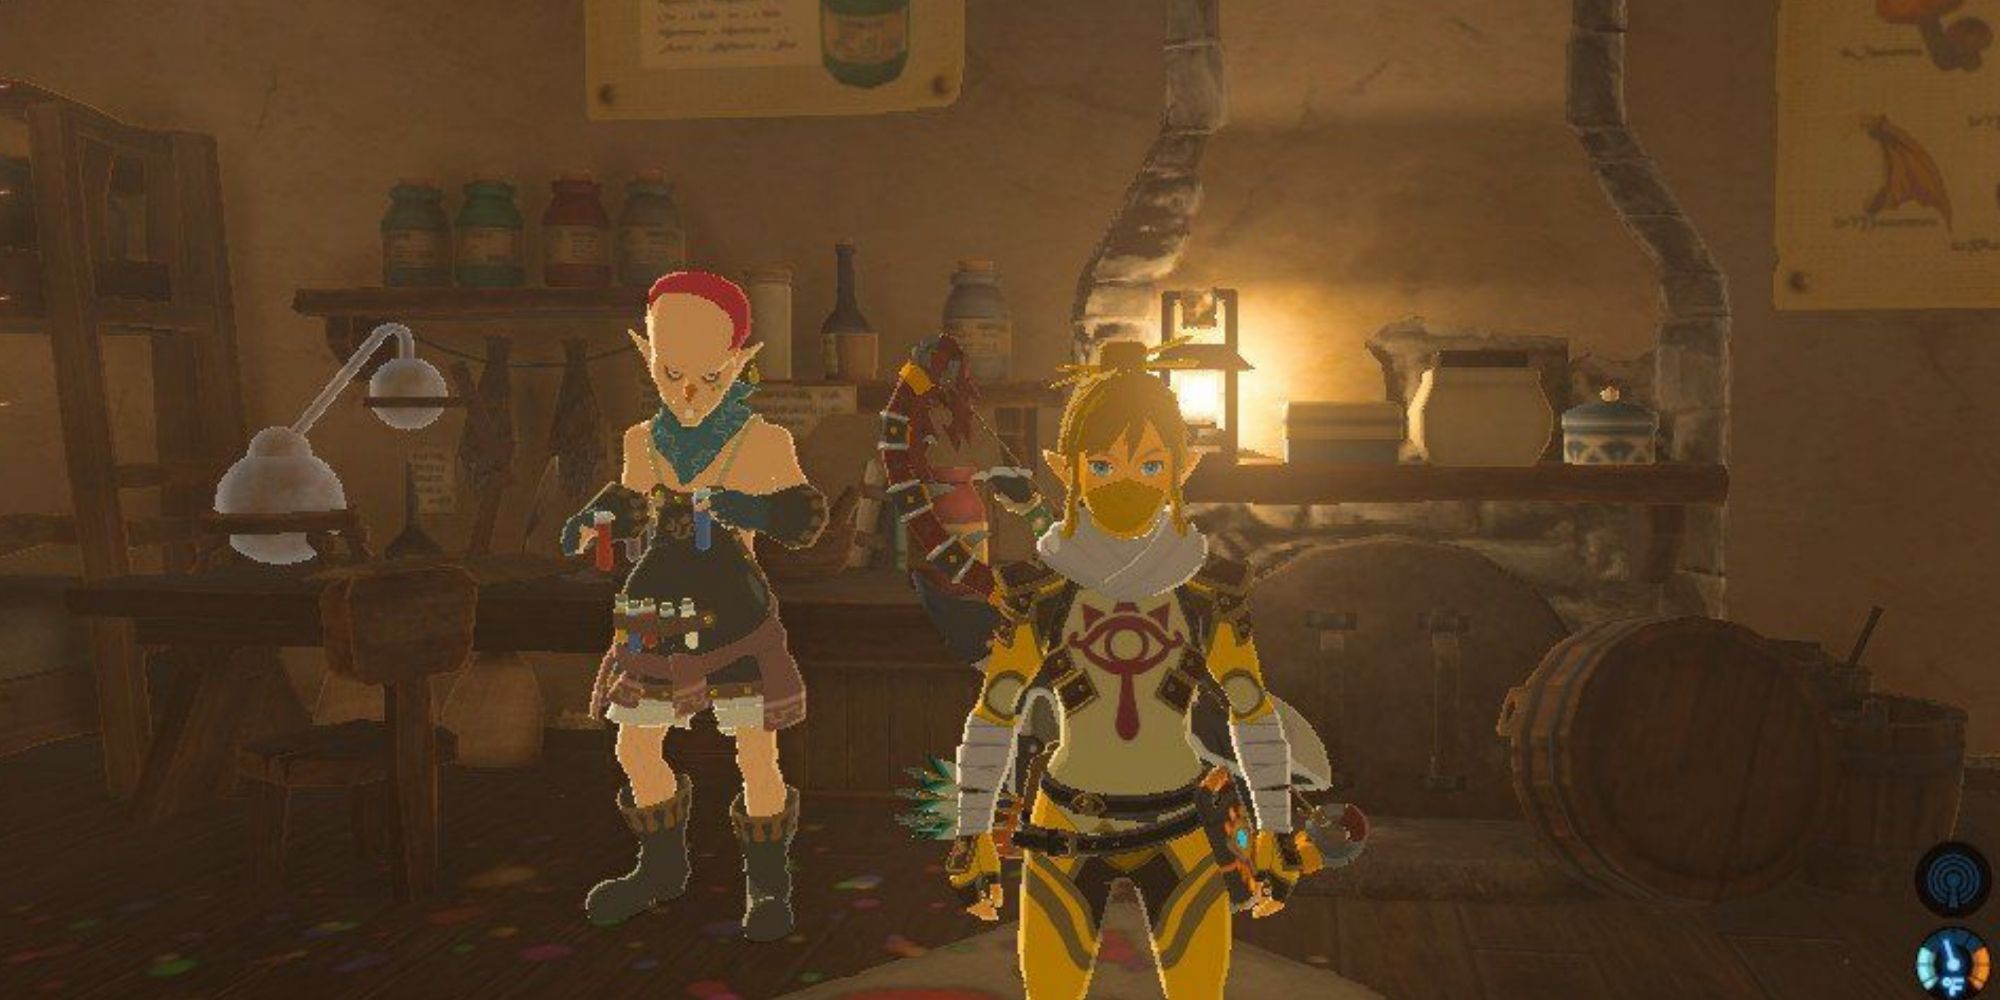 Link in the Dye Shop with the owner in the background in Breath of the Wild.